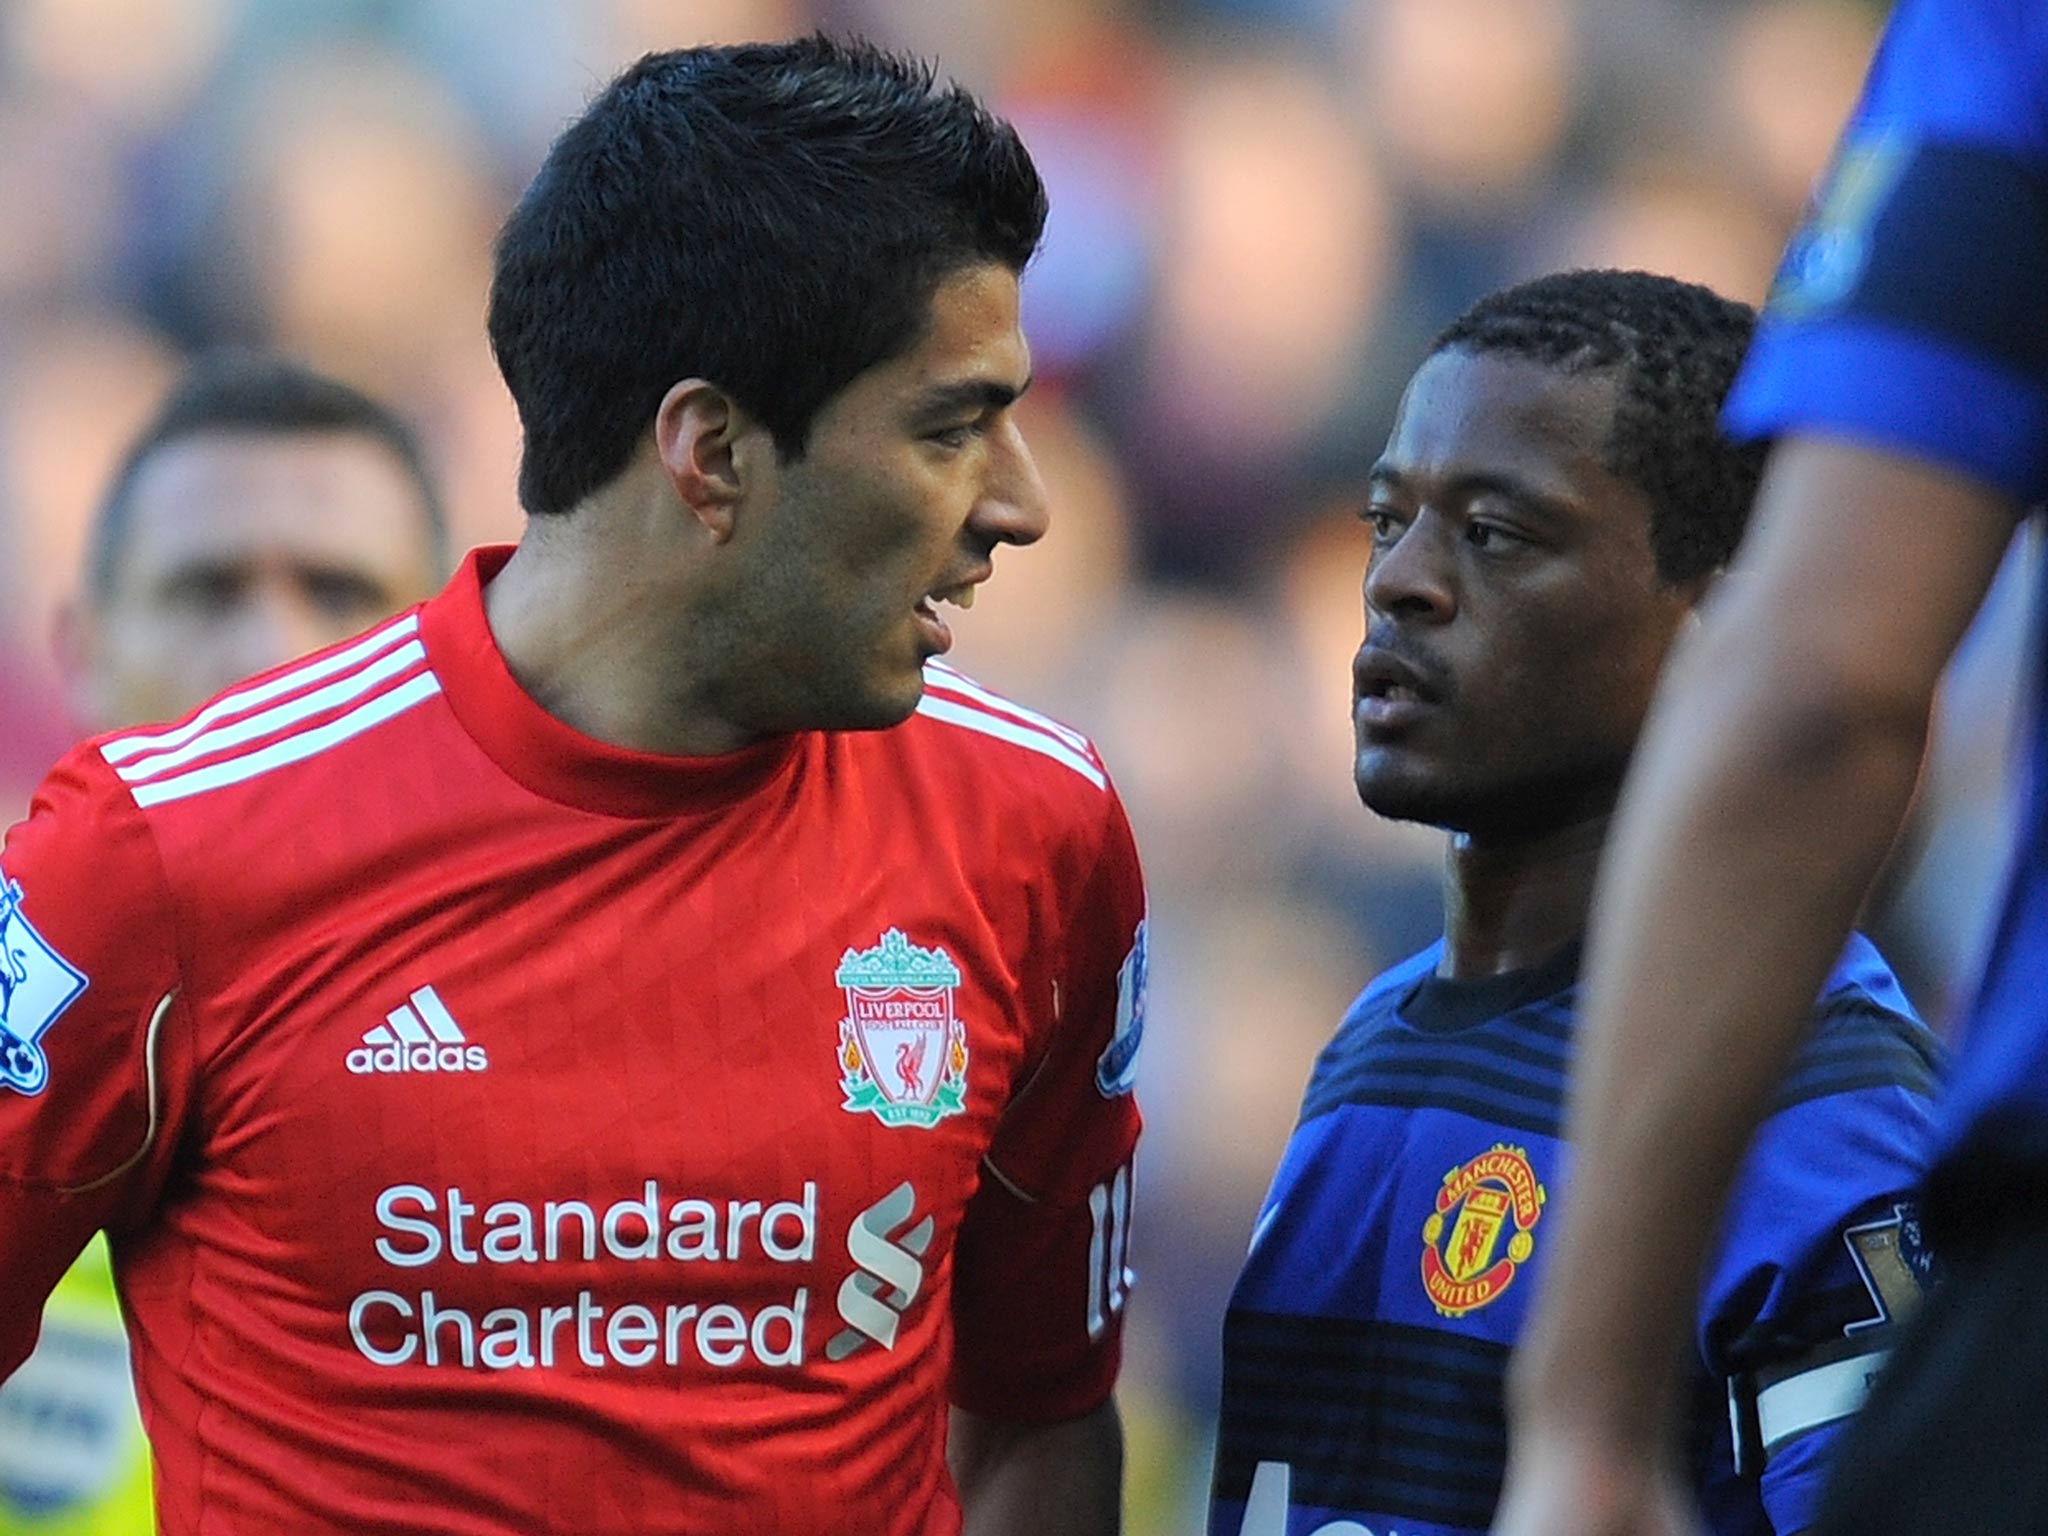 October 2011: Suarez was alleged to have racially abused Manchester United's Patrice Evra during a Premier League match. Suarez was later found guilty by an independent regulatory commission and banned for eight matches and fined £40,000.